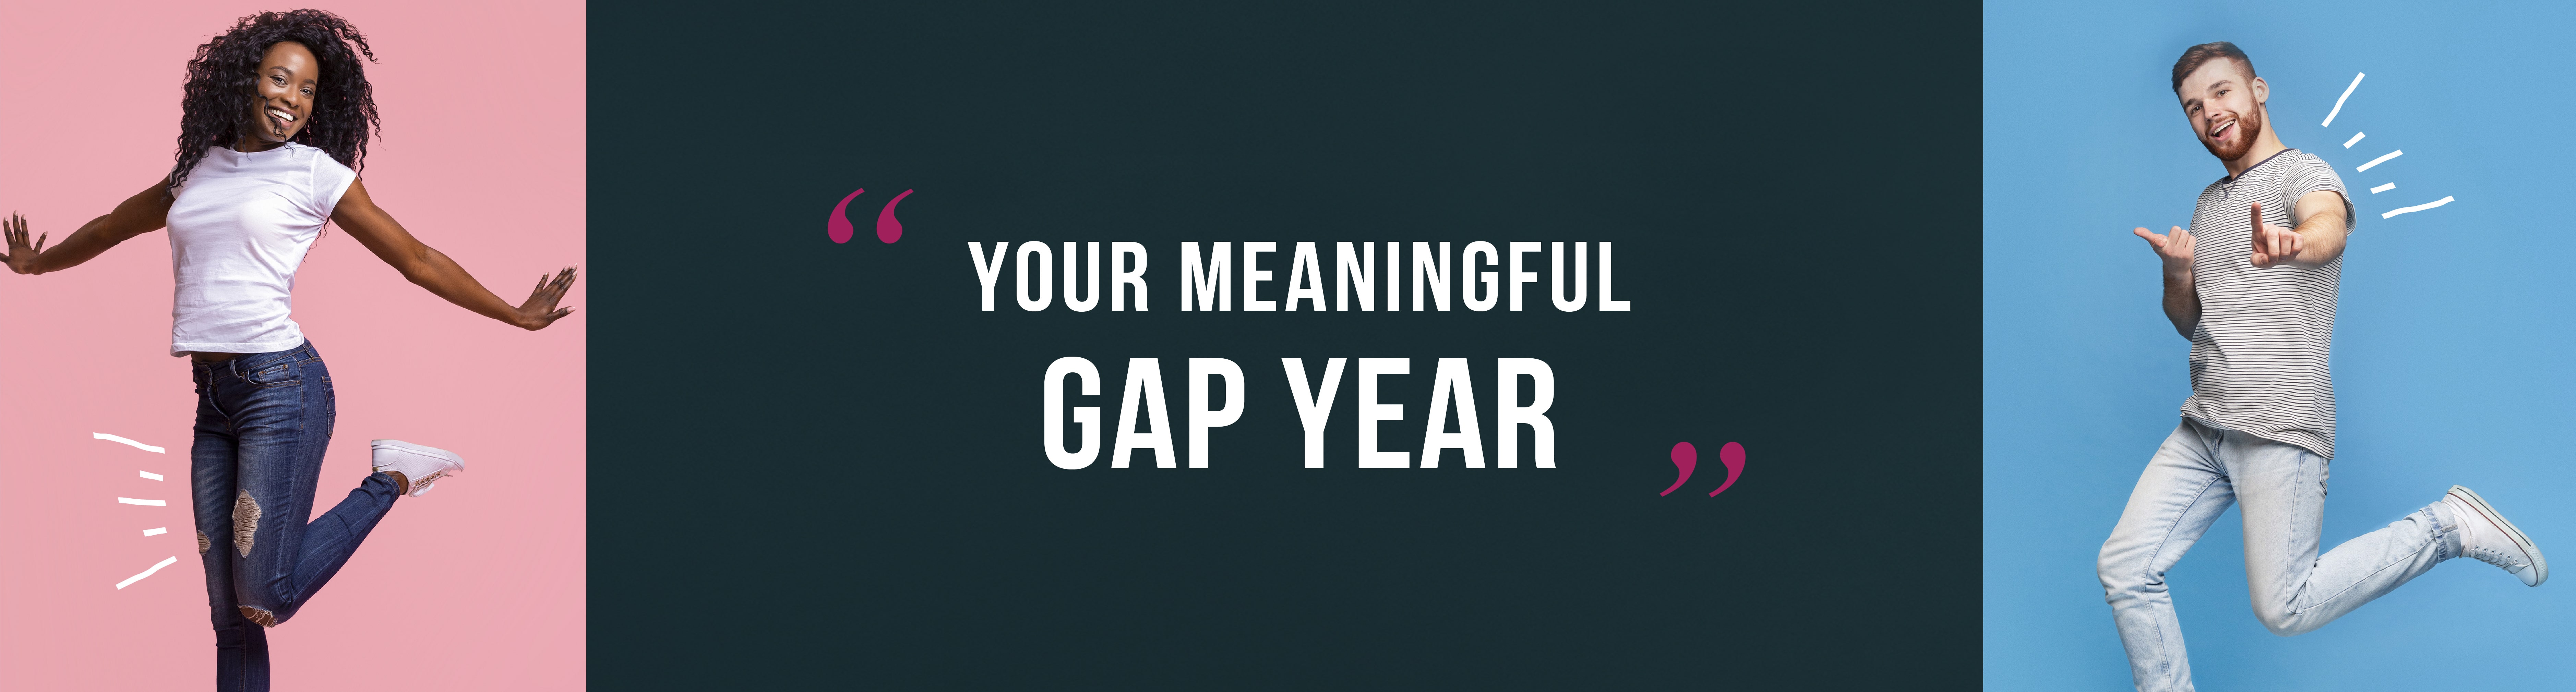 your meaningful gap year